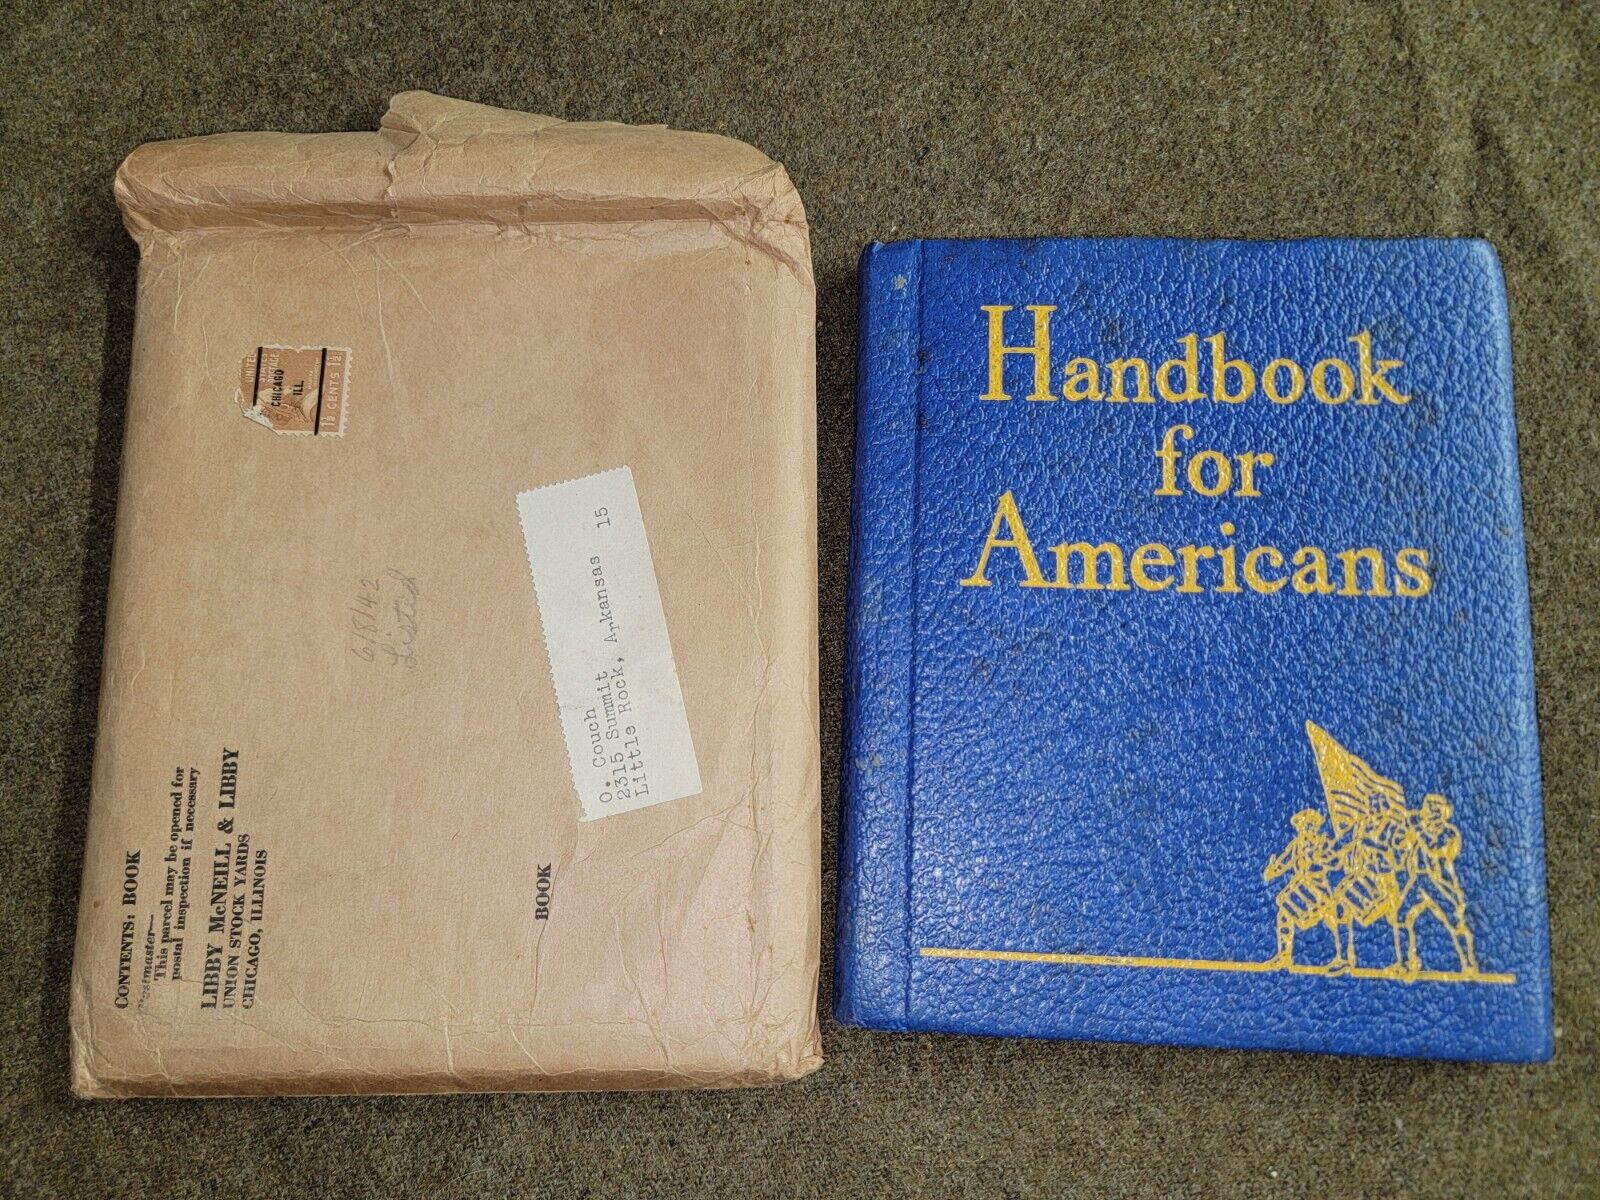 WWII Handbook for Americans in Original Shipping Paper